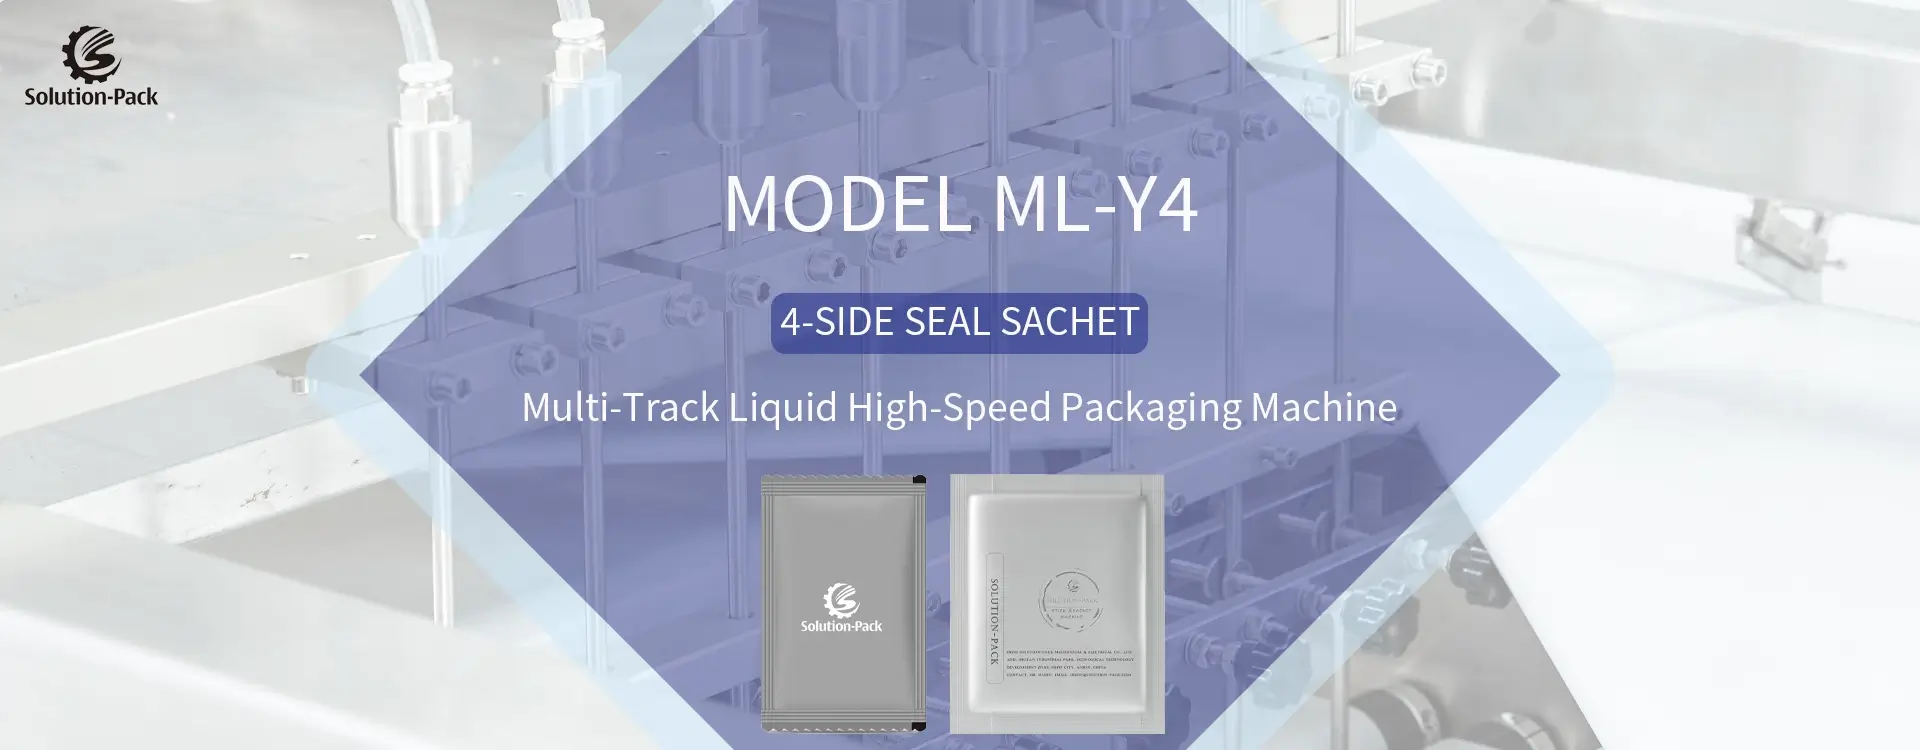 Model ML-Y4 Automatic High-Speed Multi-Track Liquid 4-Side Seal Sachet Packaging Machine Unit Heading Banner Picture | Solution-Pack